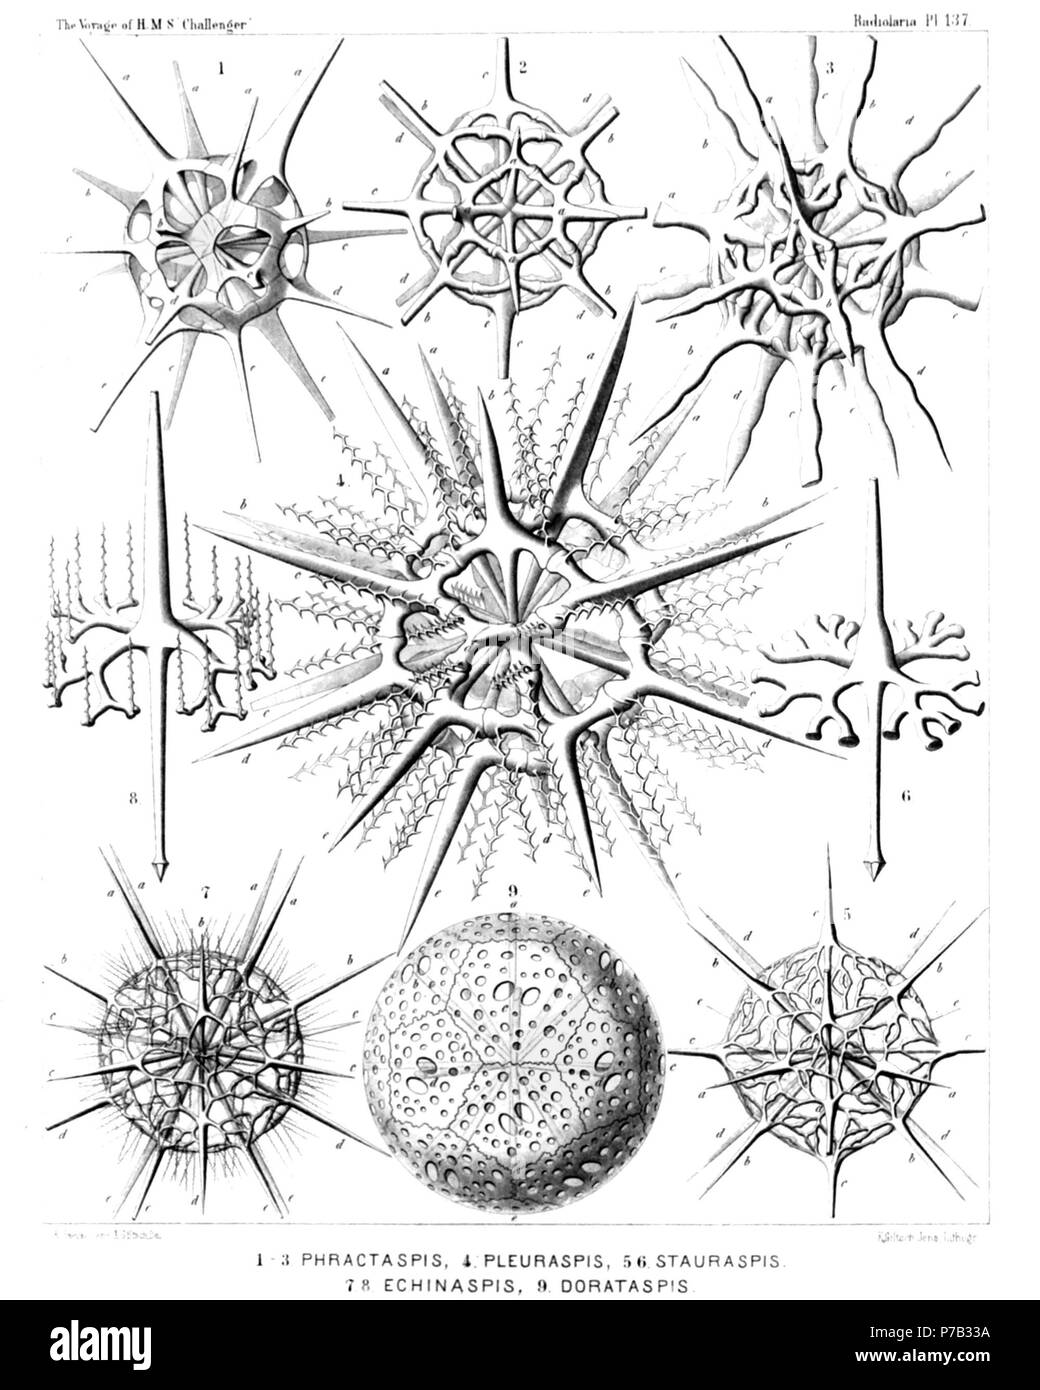 English: Illustration from Report on the Radiolaria collected by H.M.S. Challenger during the years 1873-1876. Part III. Original description follows:  Plate 137. Dorataspida.  Diam.  Fig. 1. Phractaspis complanata, n. sp., × 400  Fig. 2. Phractaspis prototypus, n. sp., × 400  Fig. 3. Phractaspis constricta, n. sp., × 400  Fig. 4. Pleuraspis horrida, n. sp., × 400  Fig. 5. Stauruspis stauracantha, n. sp., × 300  Fig. 6. Stauruspis stauracantha, n. sp., × 600  A single spine.  Fig. 7. Echinaspis echinoides, n. sp., × 300  Fig. 8. Echinaspis echinoides, n. sp., × 800  A single spine.  Fig. 9. Co Stock Photo